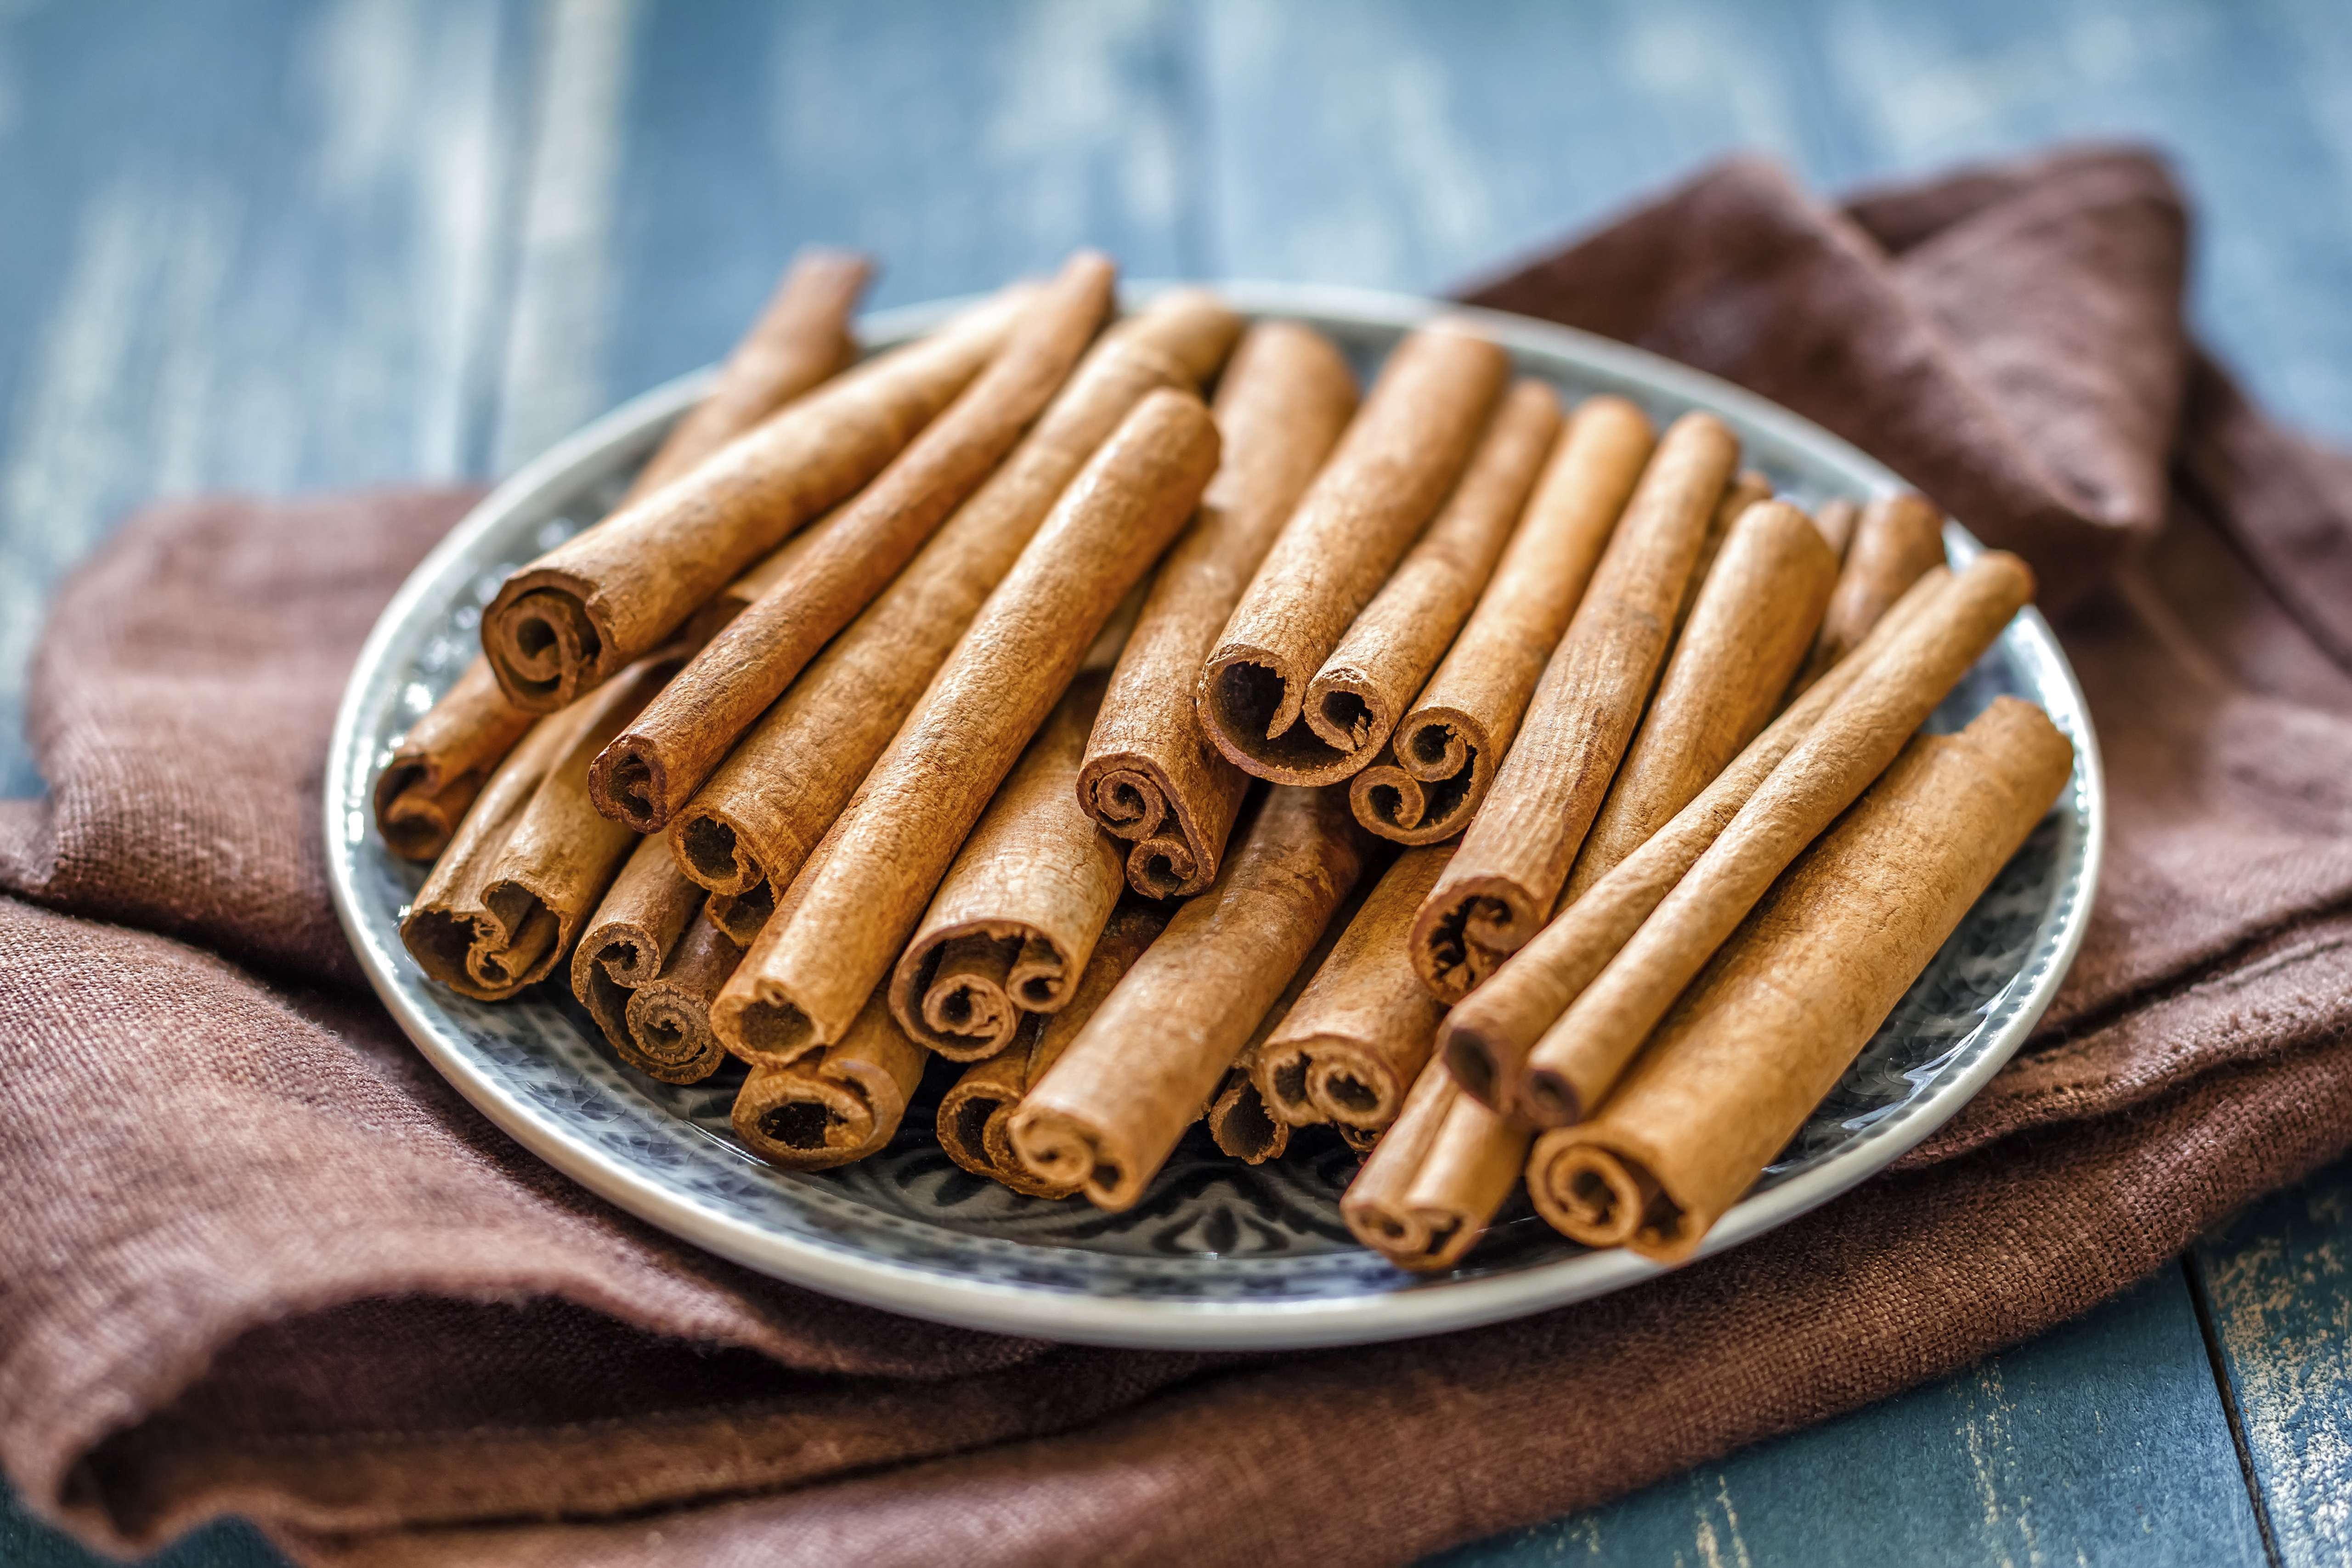 Cinnamon is more often associated with pastries in Western cuisine. Photo: Alamy Stock Photo